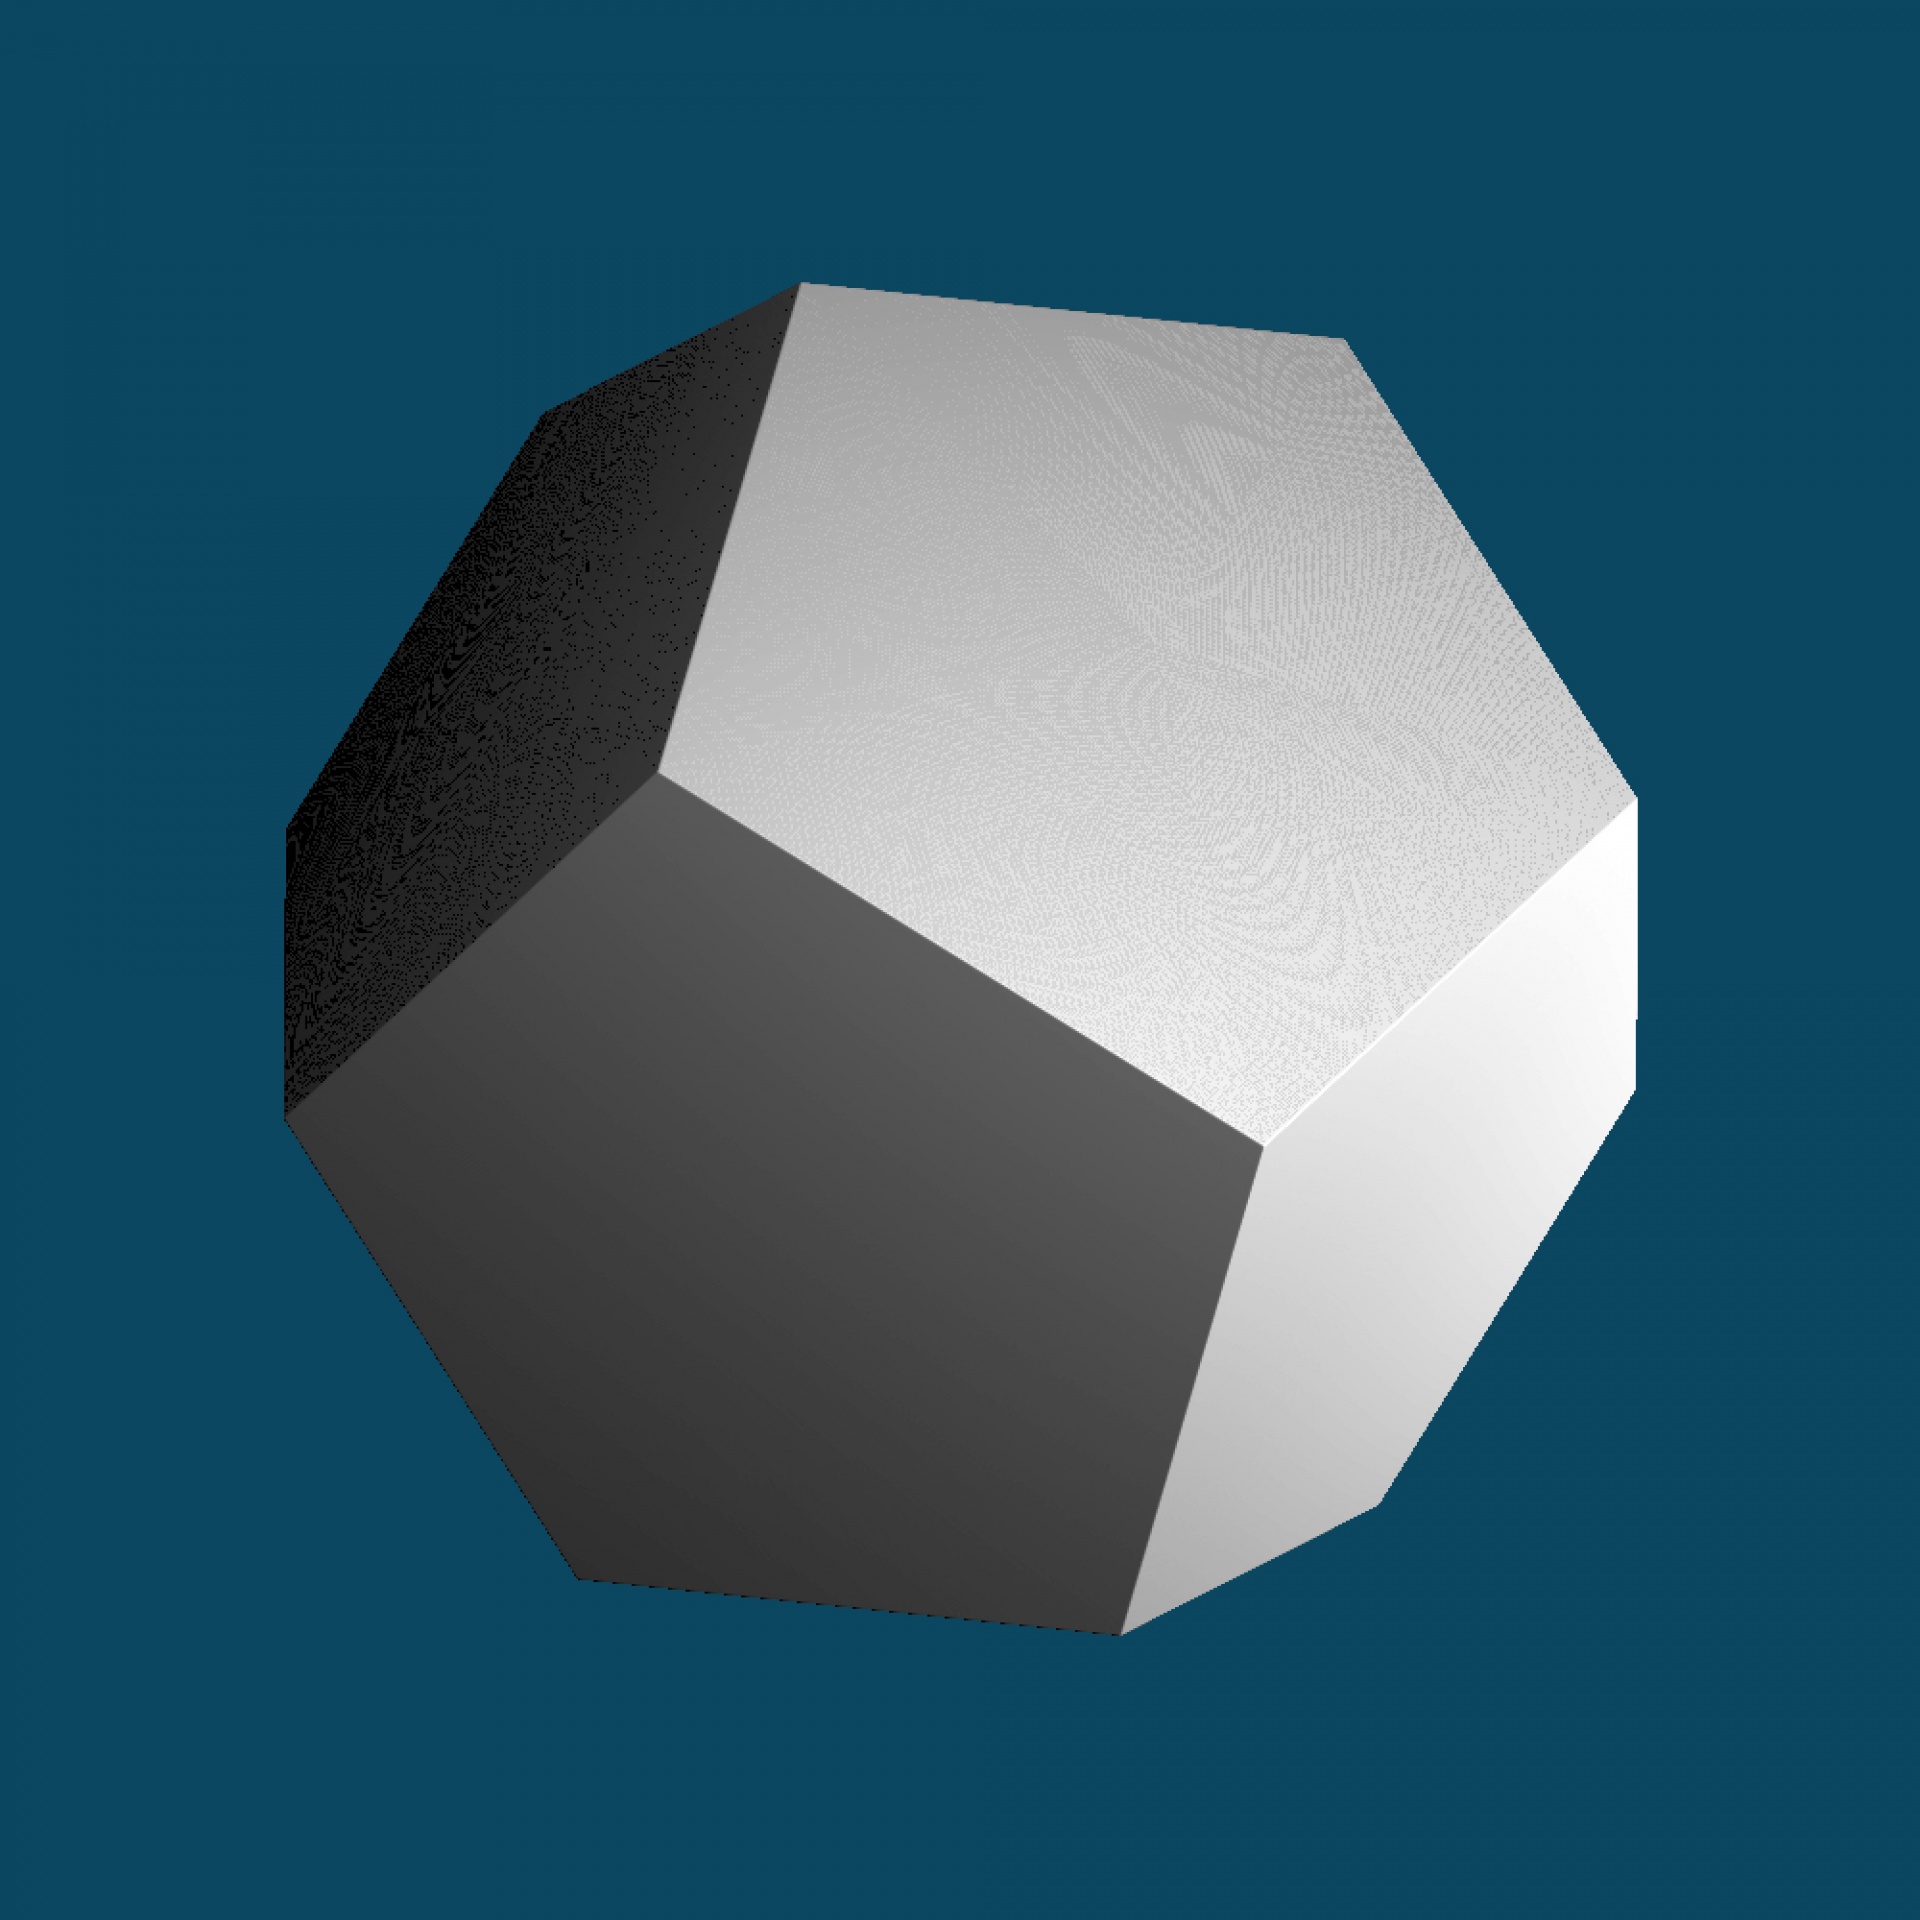 gray dodecahedron blue free photo